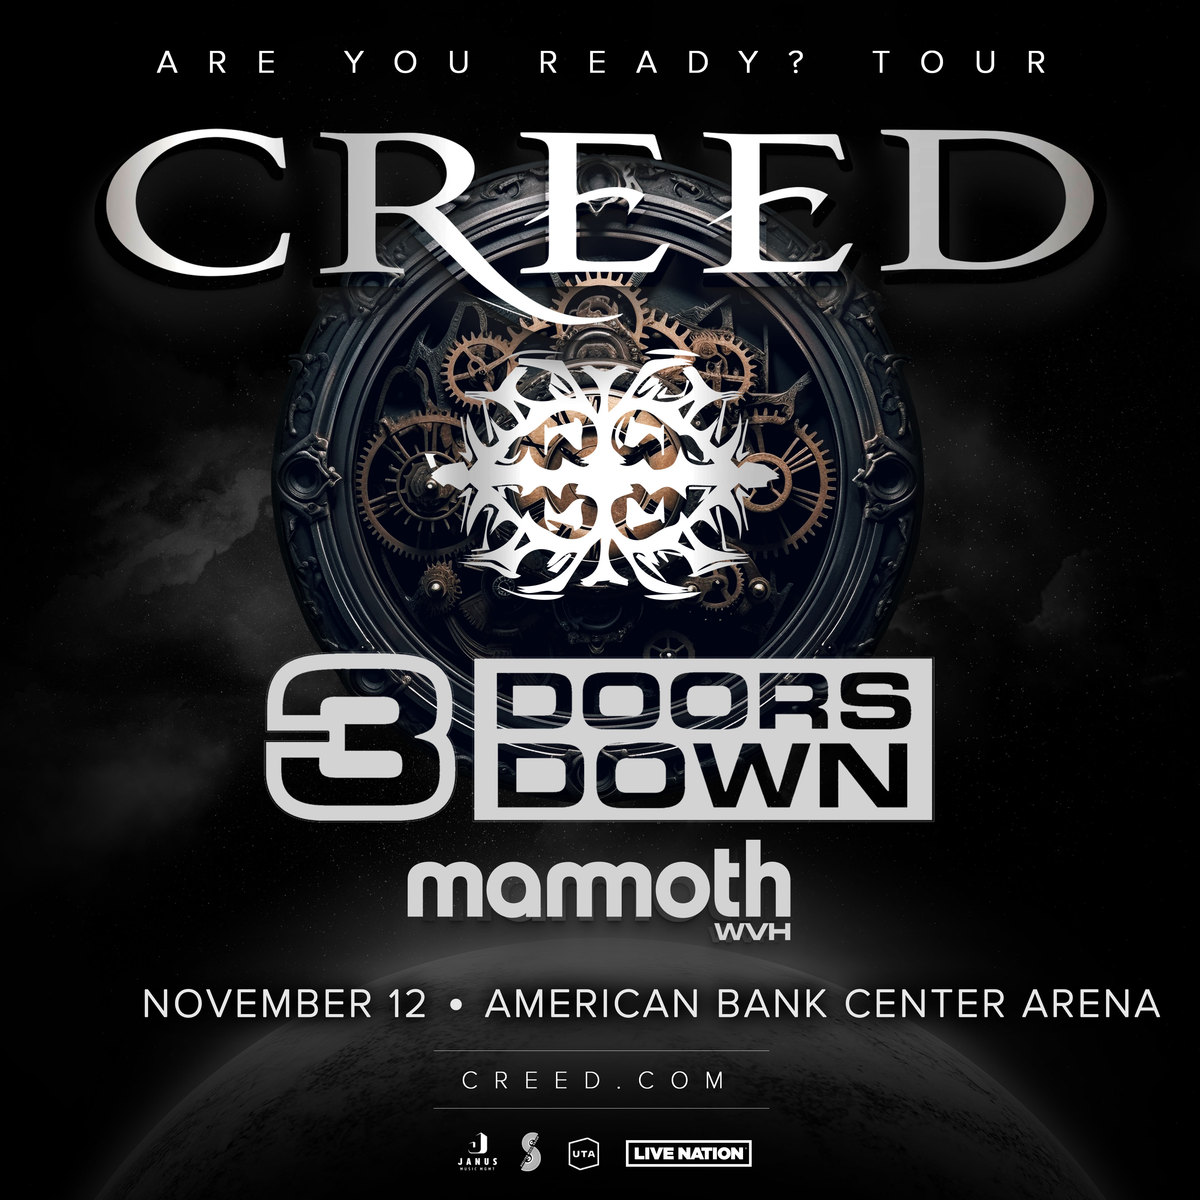 Creed: Are You Ready? Tour 